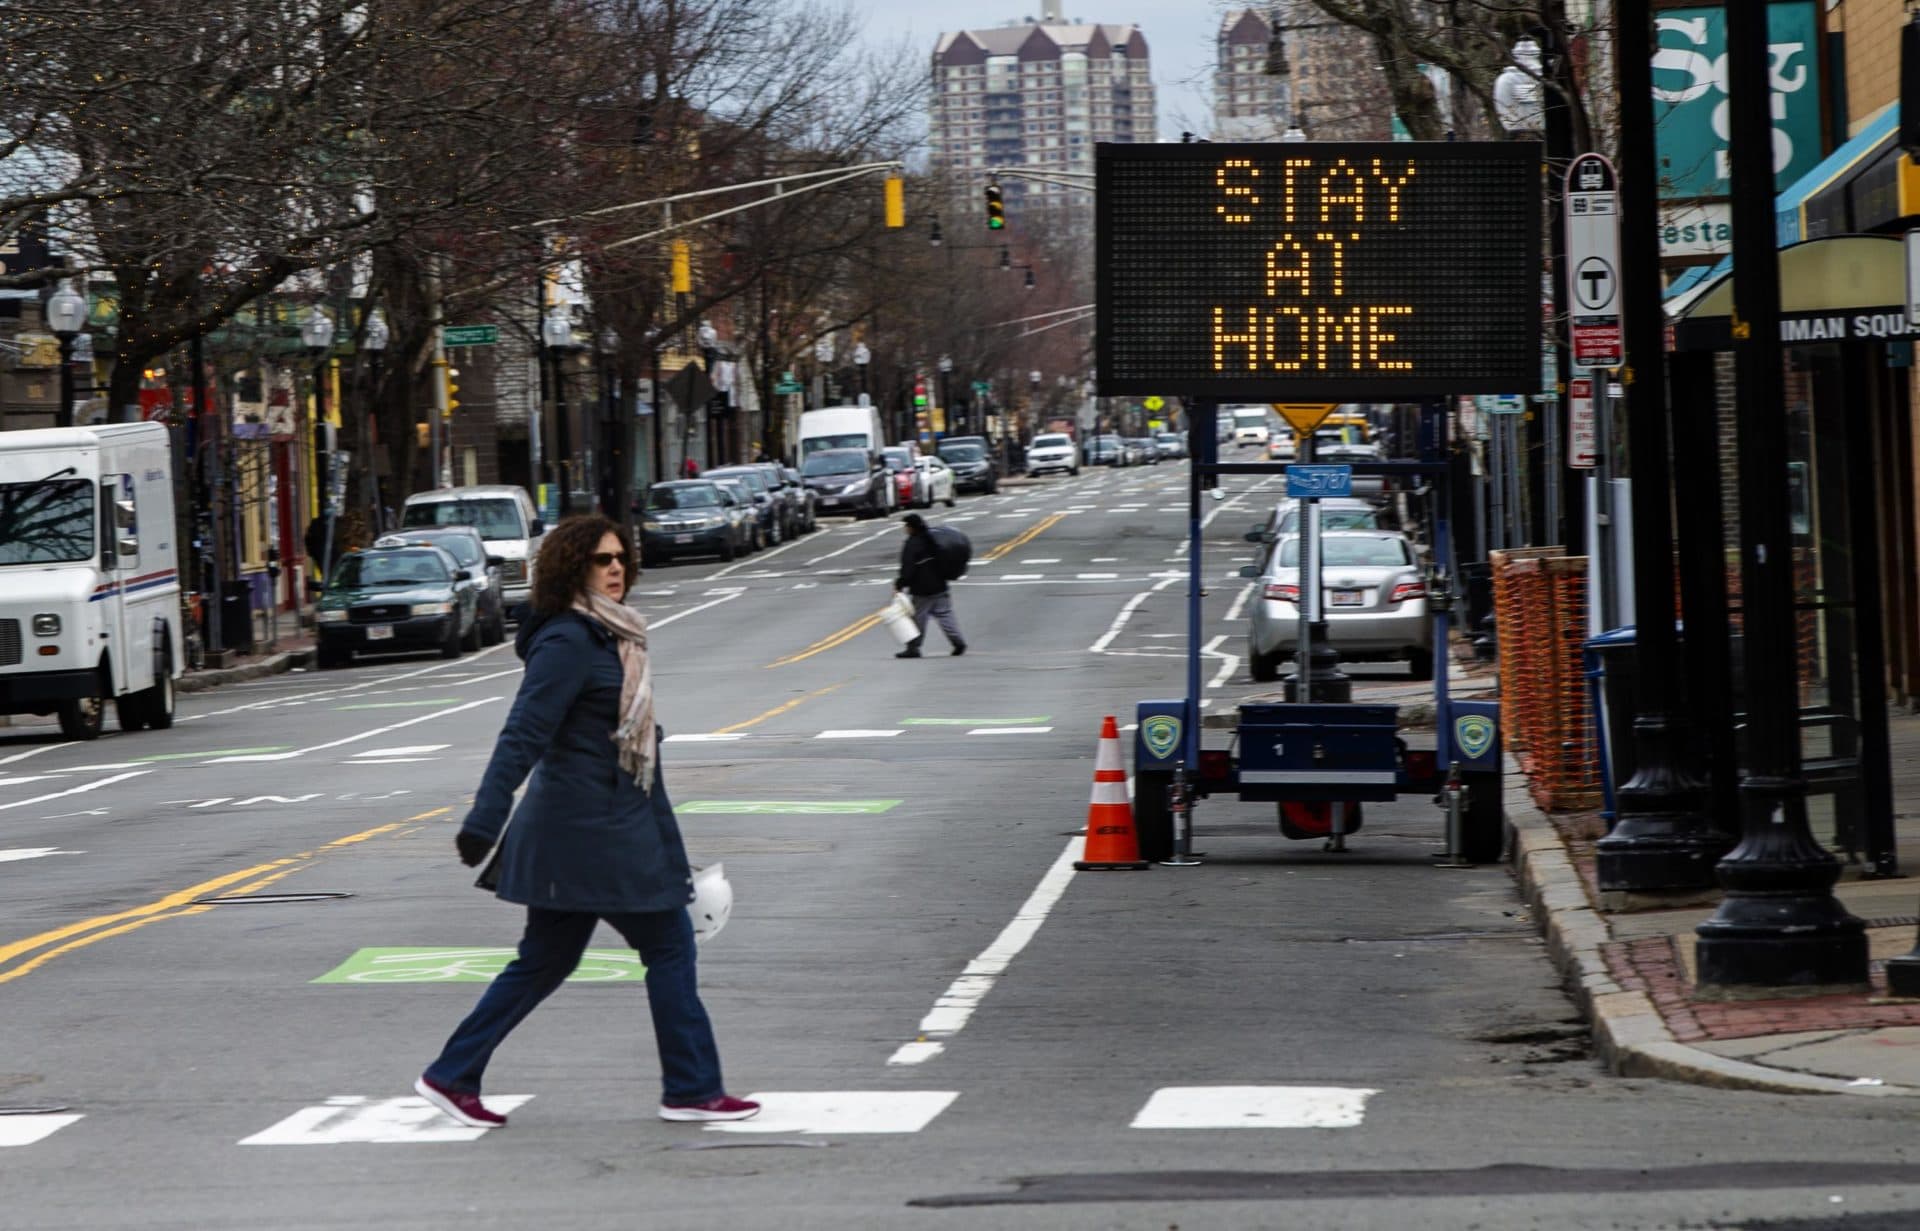 A sign in Inman Square in Cambridge urging residents to stay home during the Cornavirus epidemic. (Jesse Costa/WBUR)